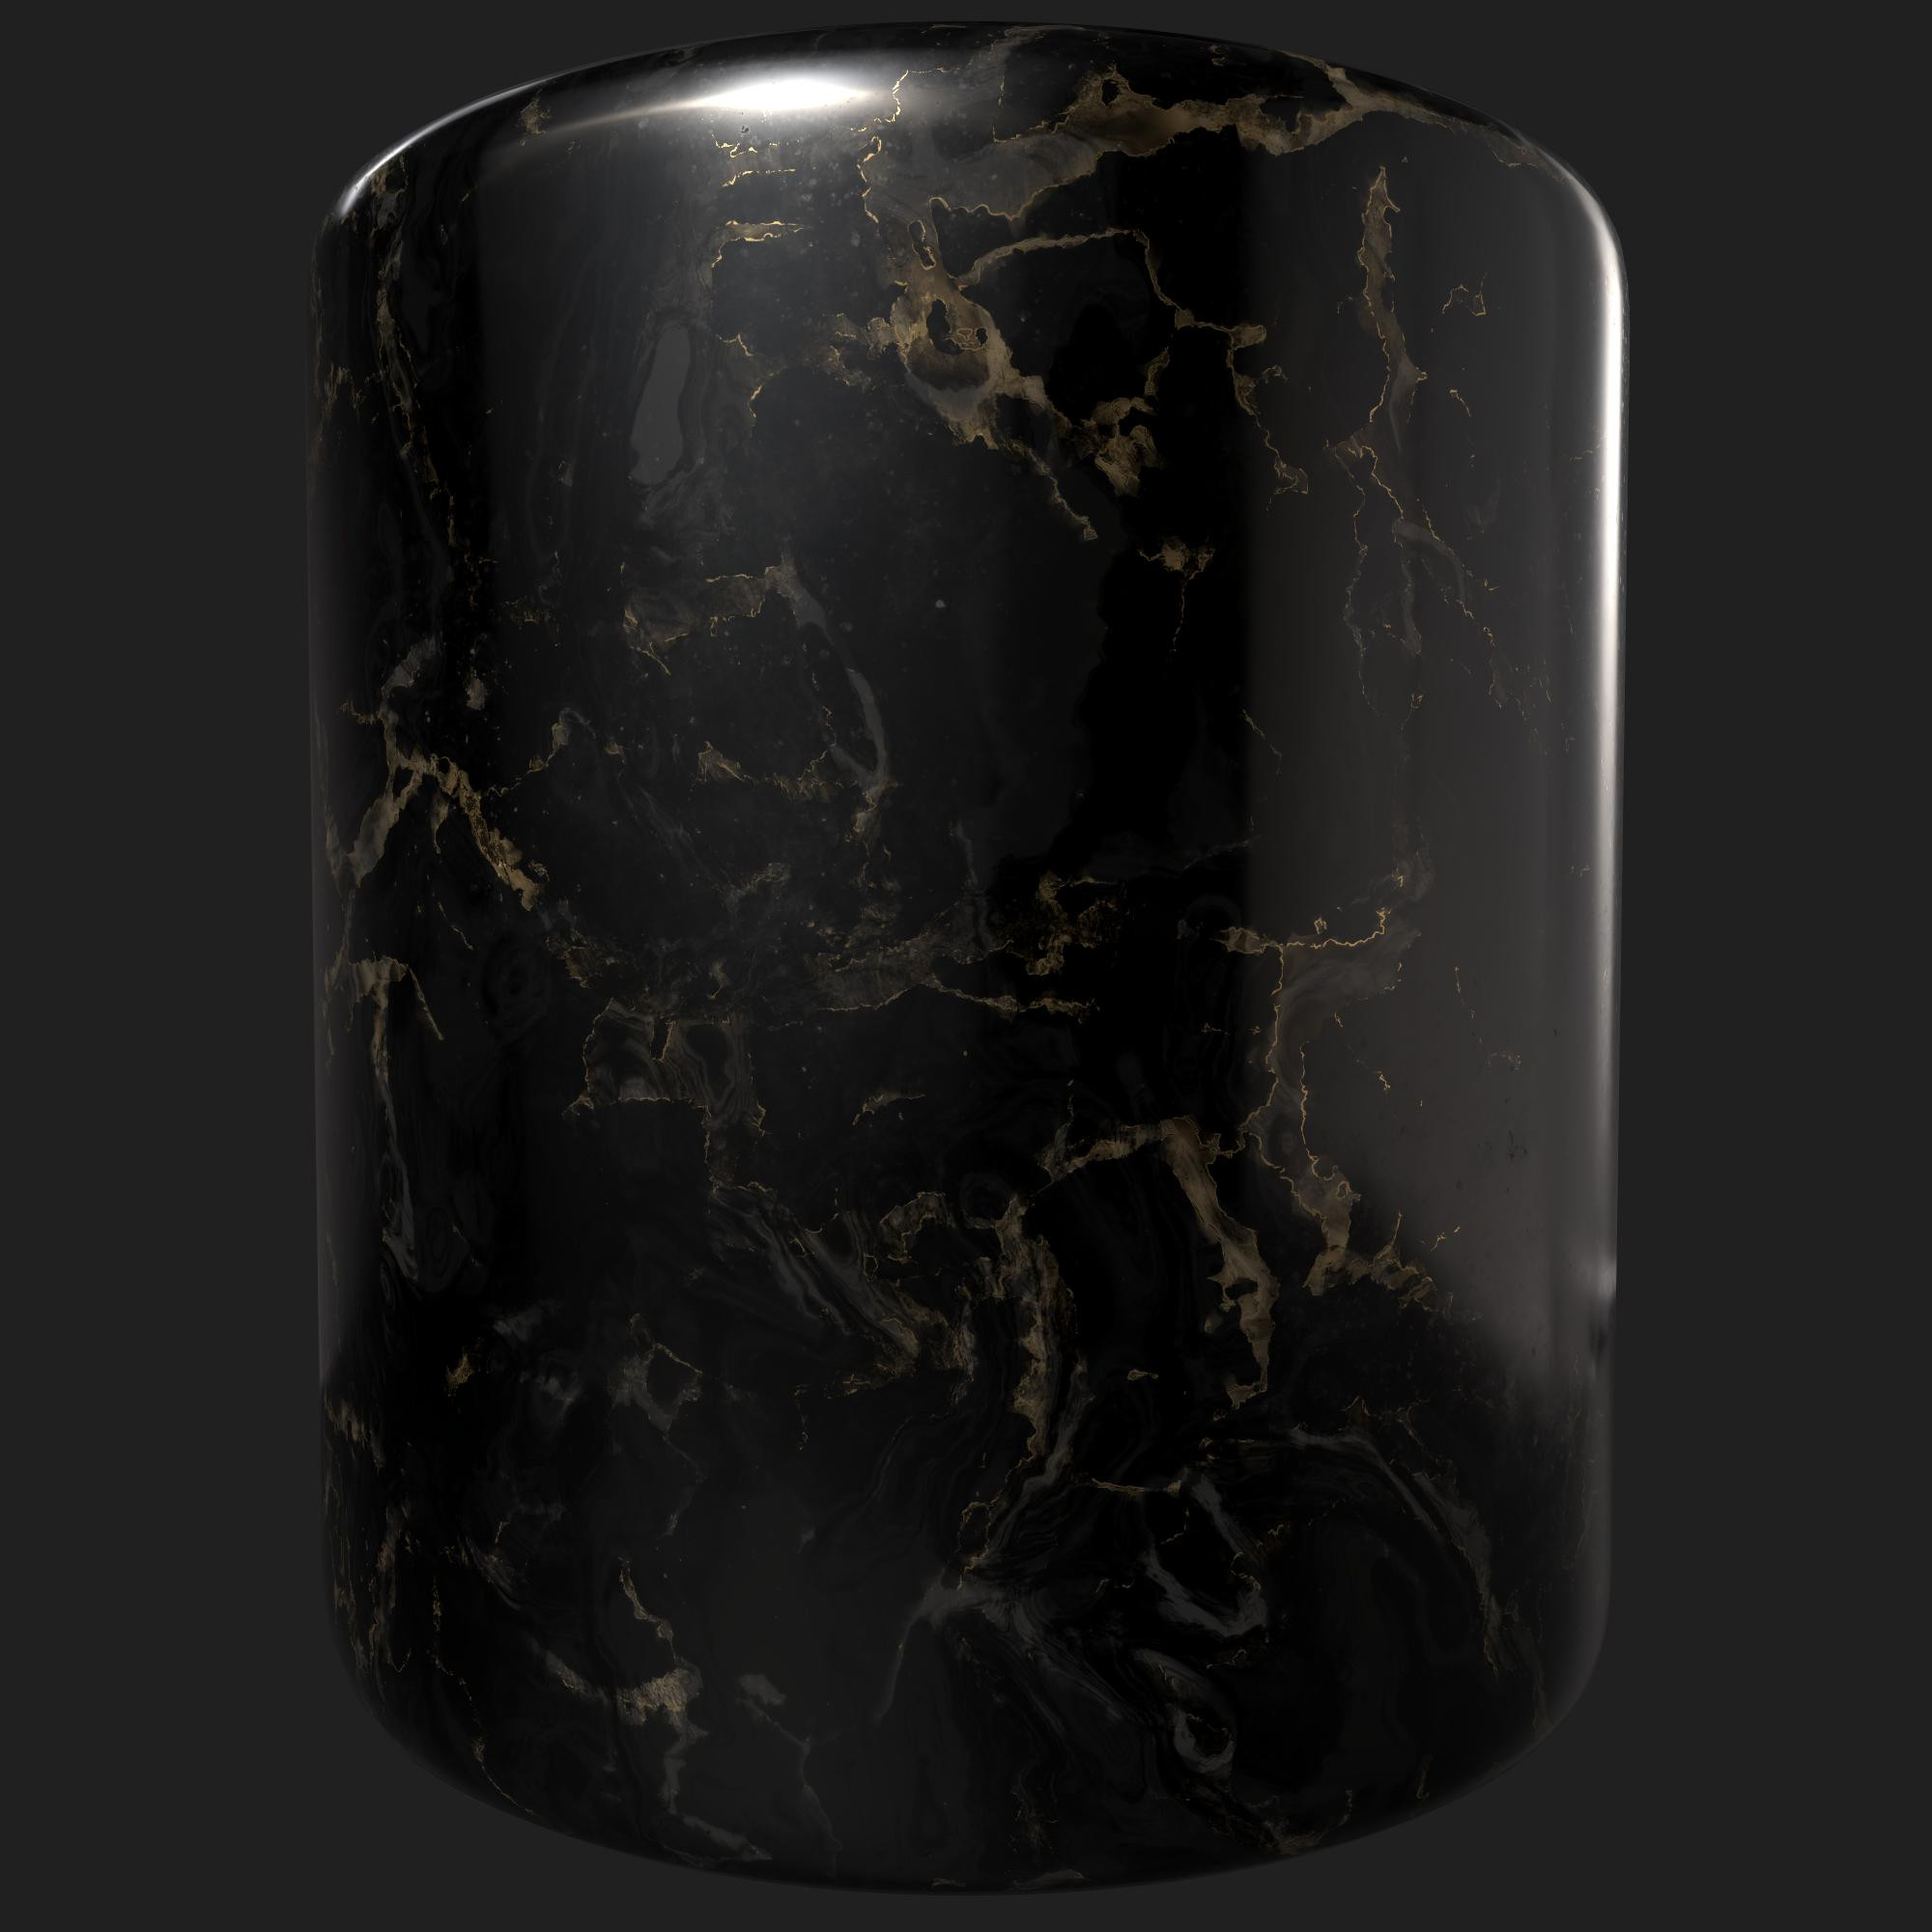 The black marble material, created and rendered in Substance Designer